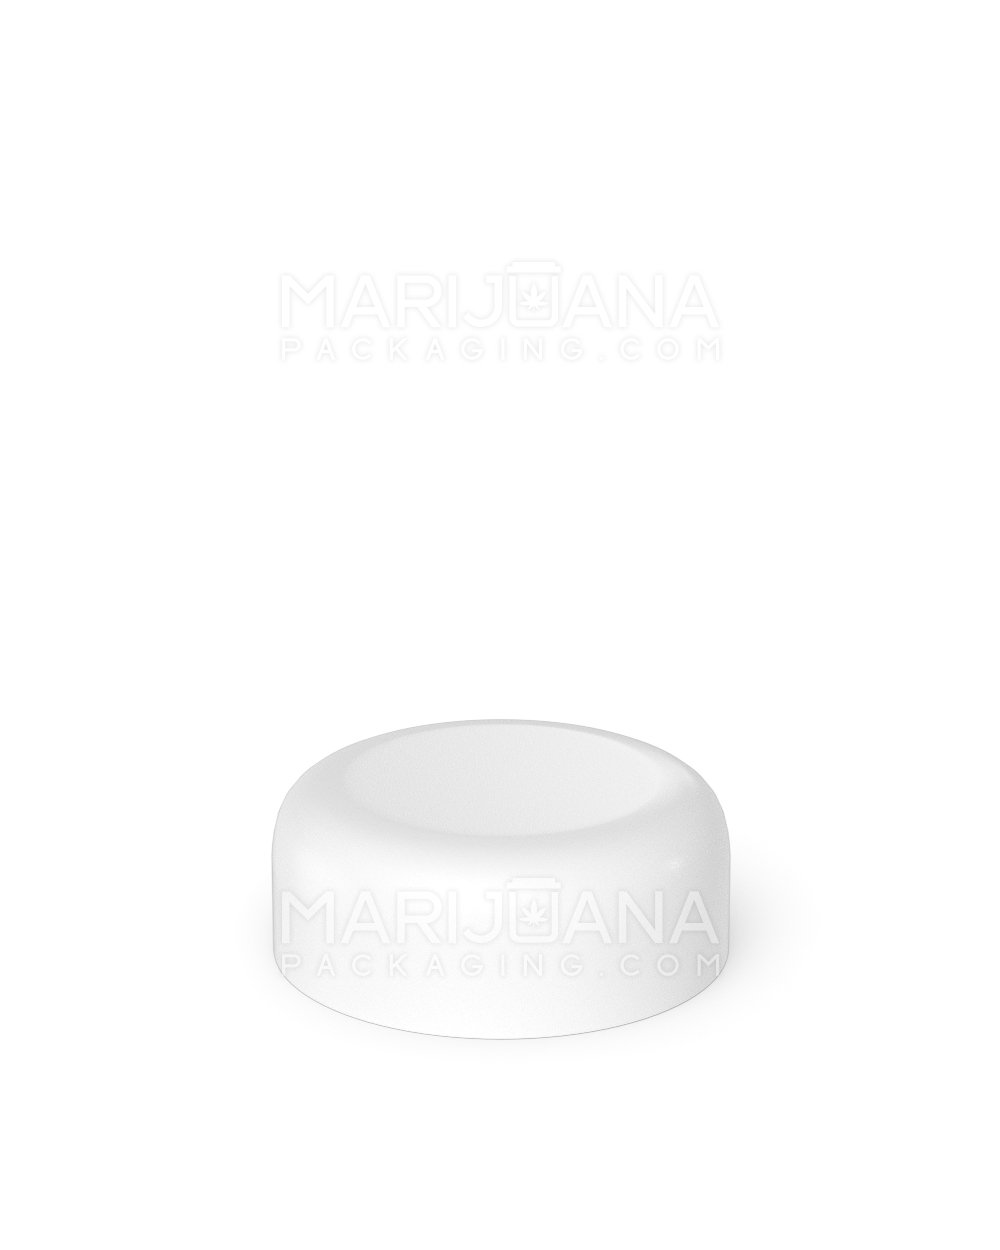 Child Resistant | Smooth Push Down & Turn Plastic Caps w/ Foam Liner | 32mm - Semi Gloss White - 320 Count - 3